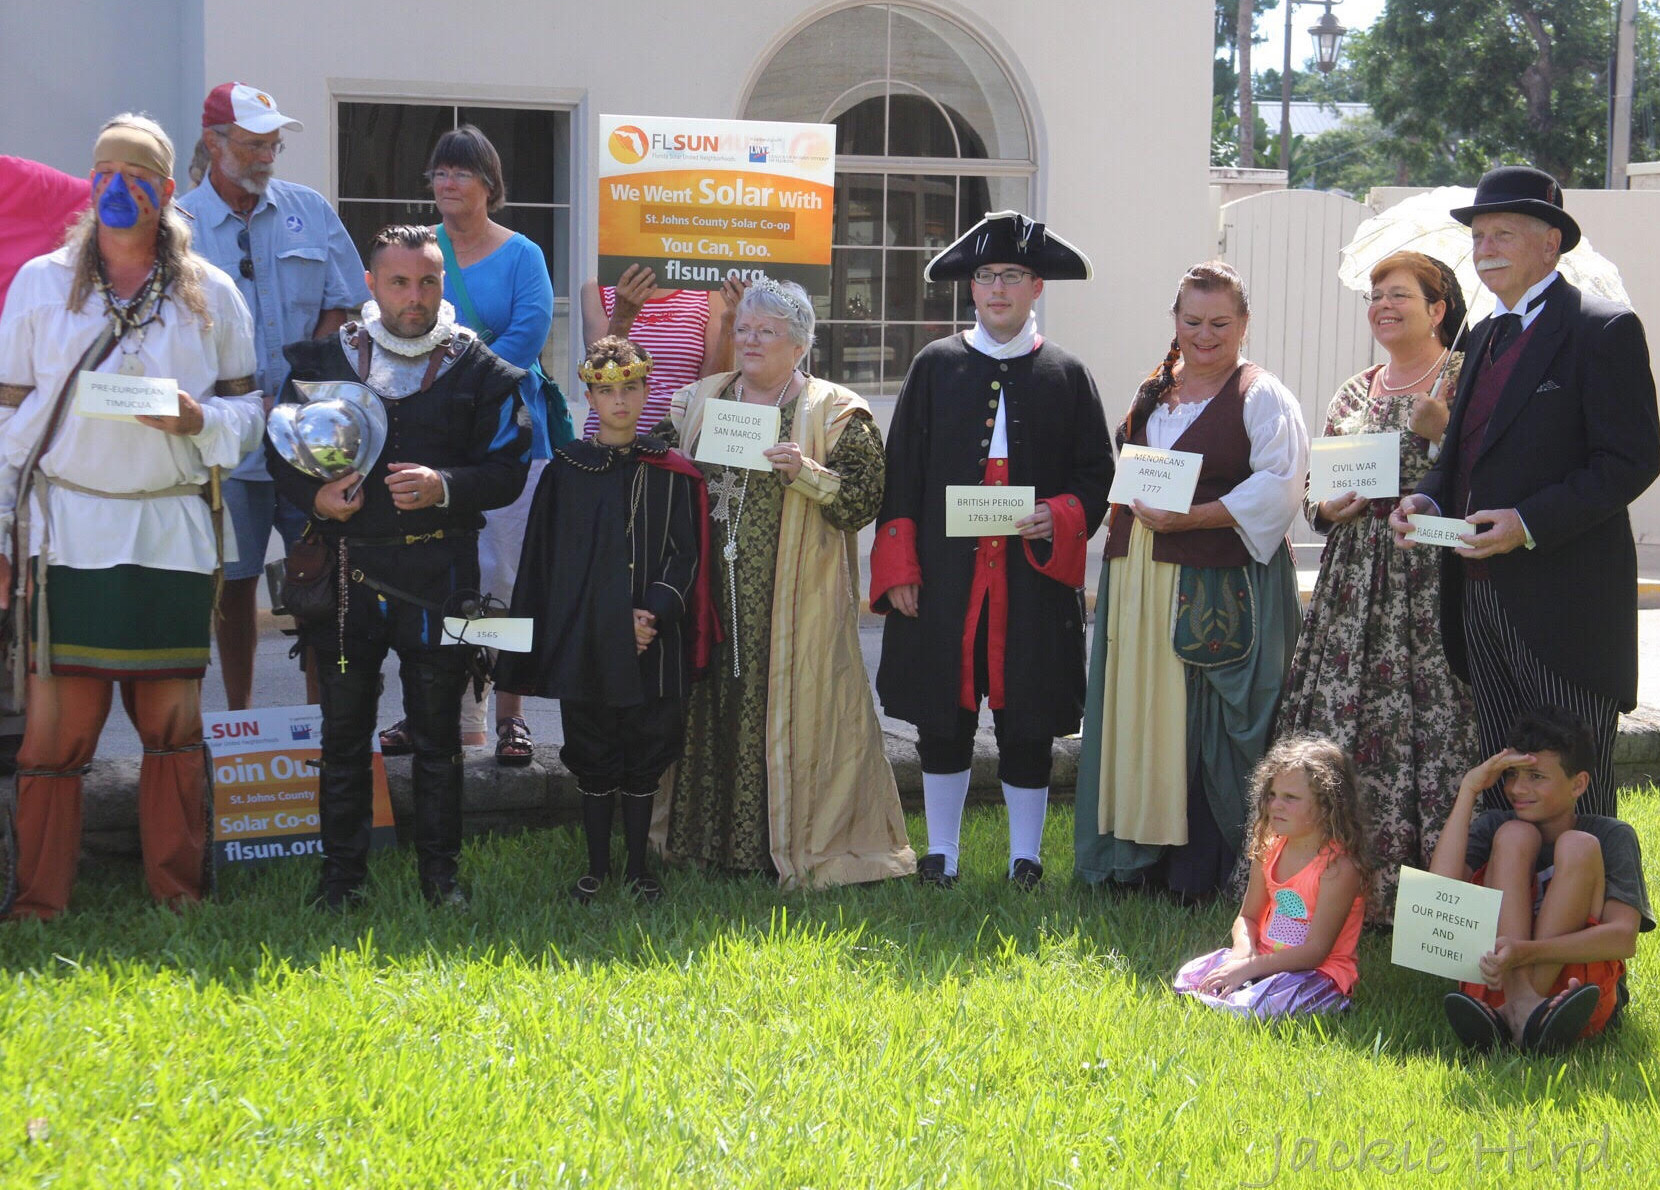 Historical re-enactors stand with signs at the solar cooperative launch event.